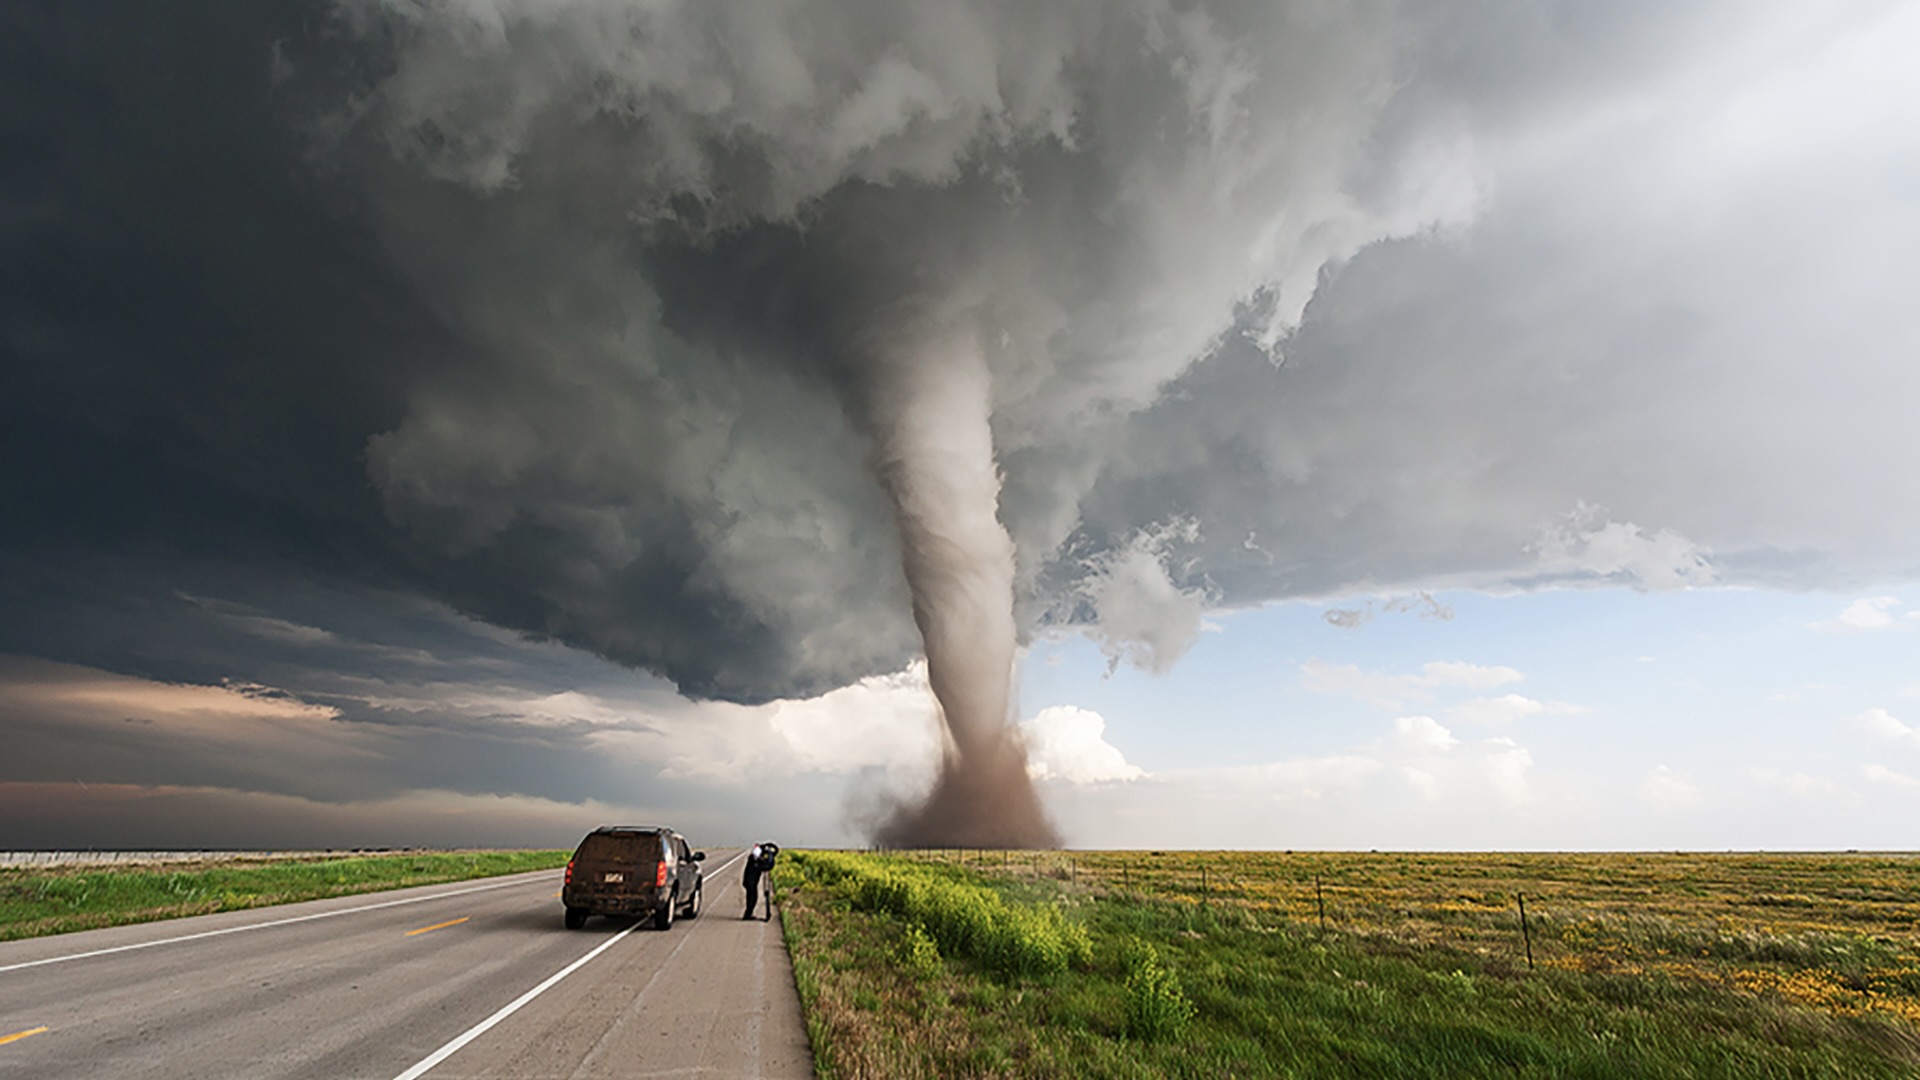  jaw-dropping weather photos 500px 